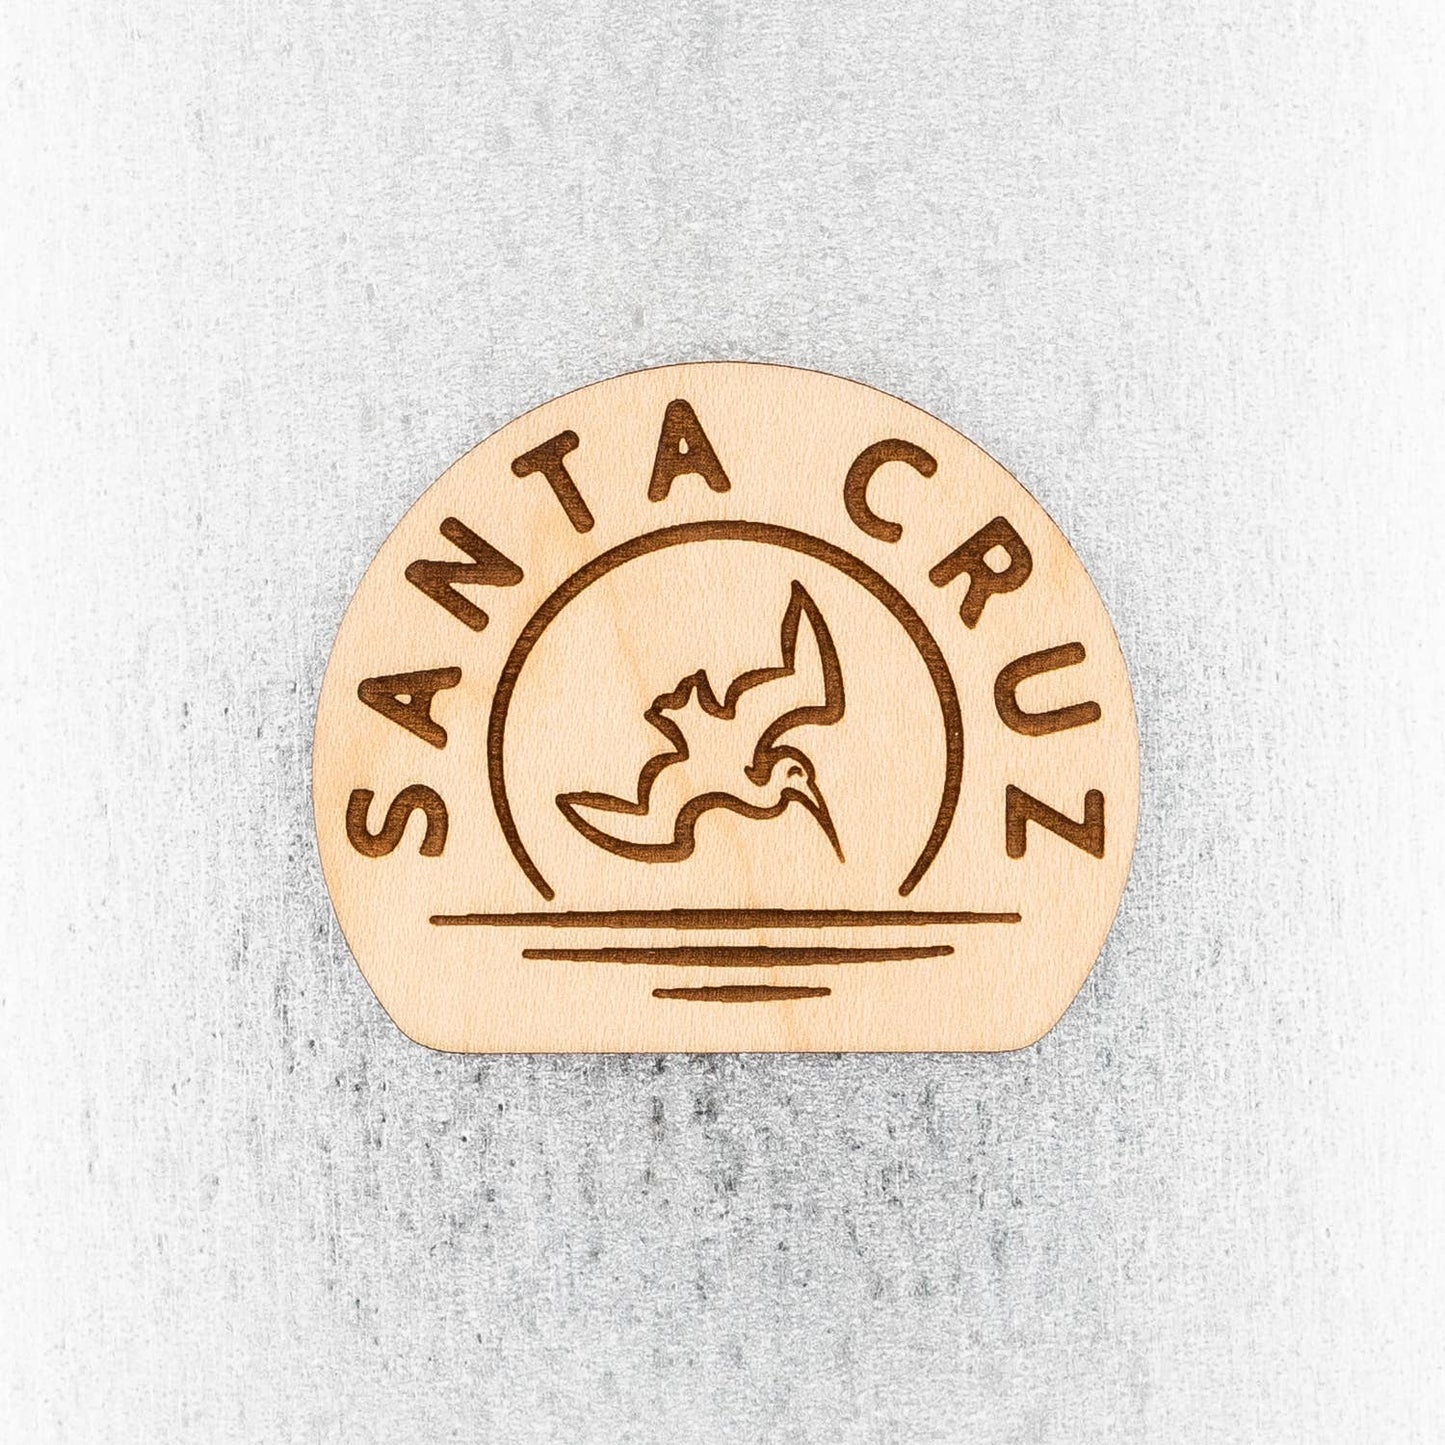 Wooden magnet with Santa Cruz and pelican diving into ocean at sunset